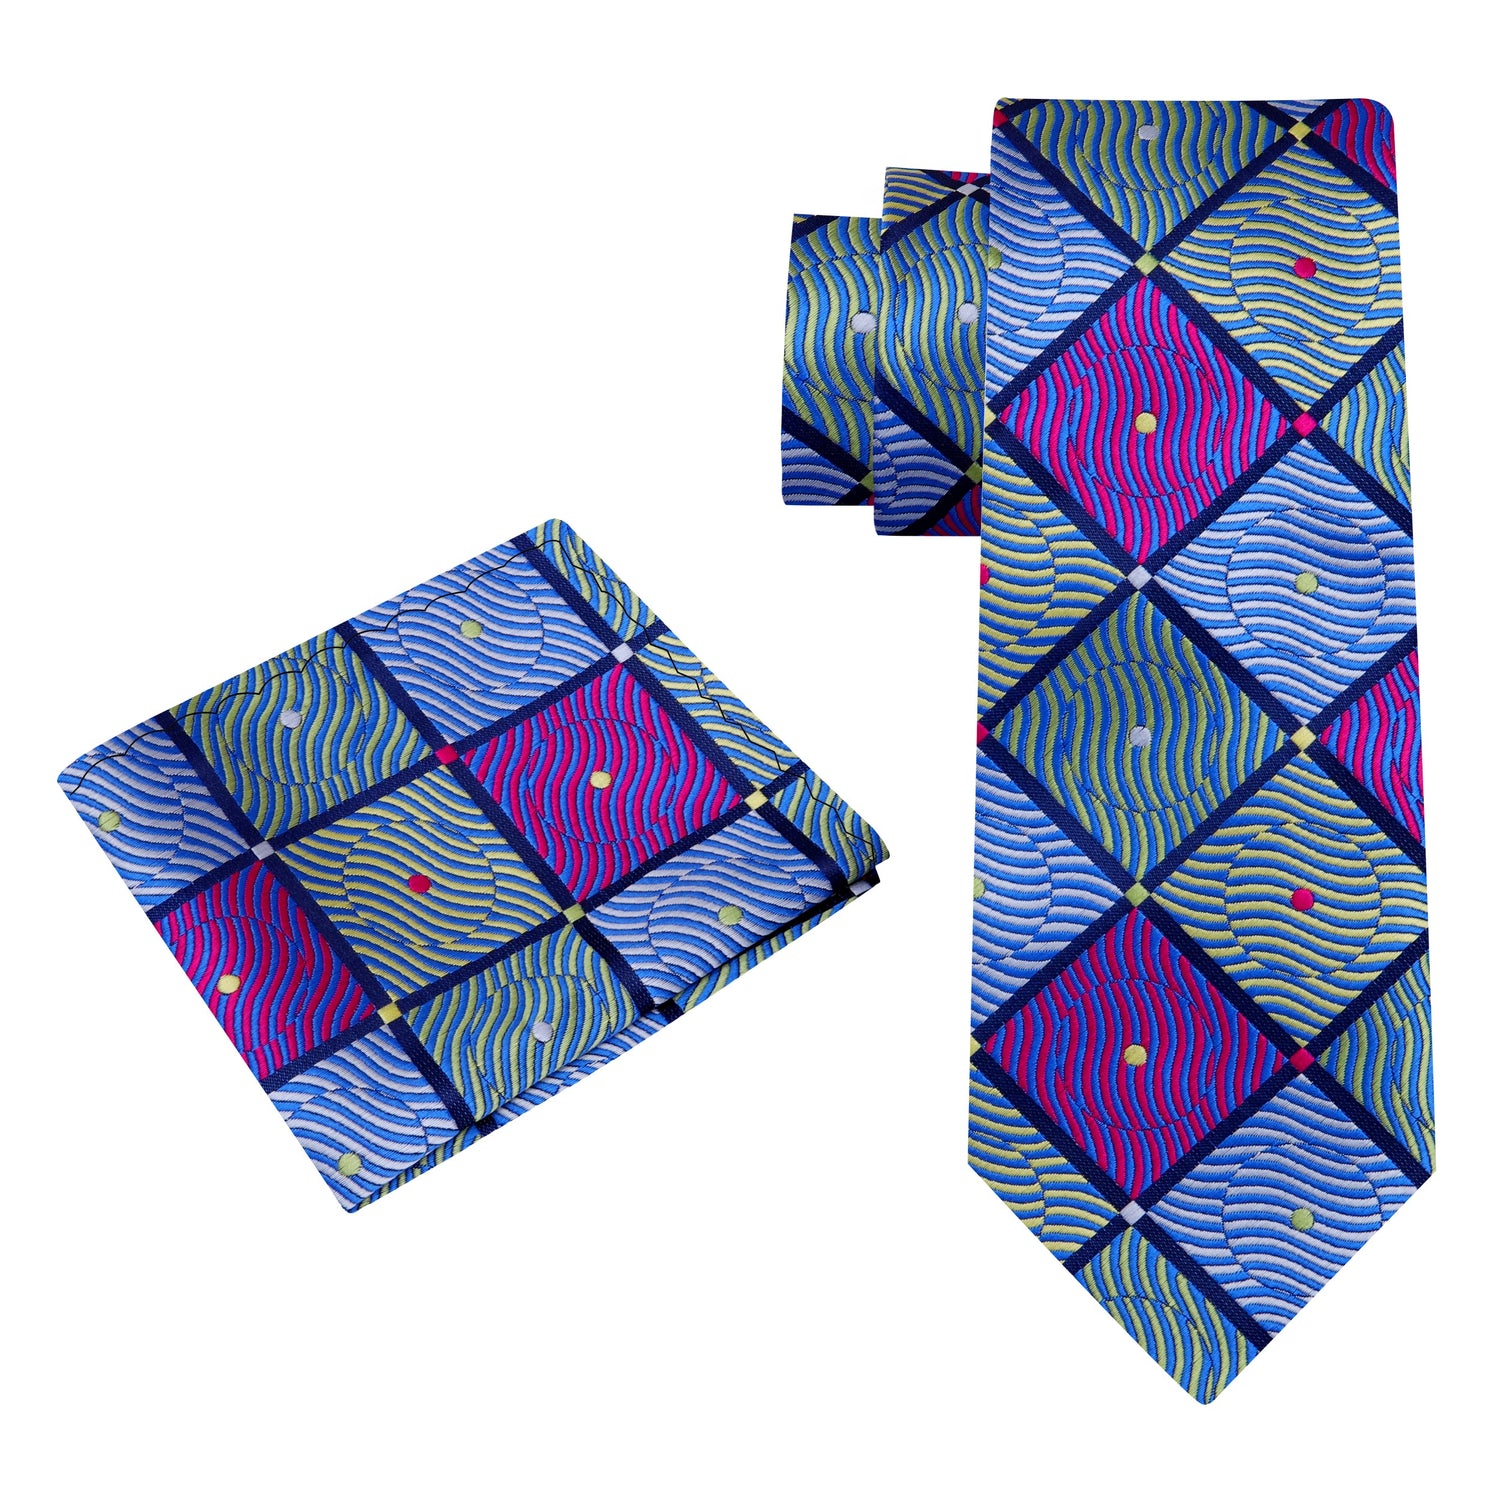 Alt view: A Purple, Green, Blue Geometric With Small Dots Pattern Silk Necktie, Matching Pocket Square